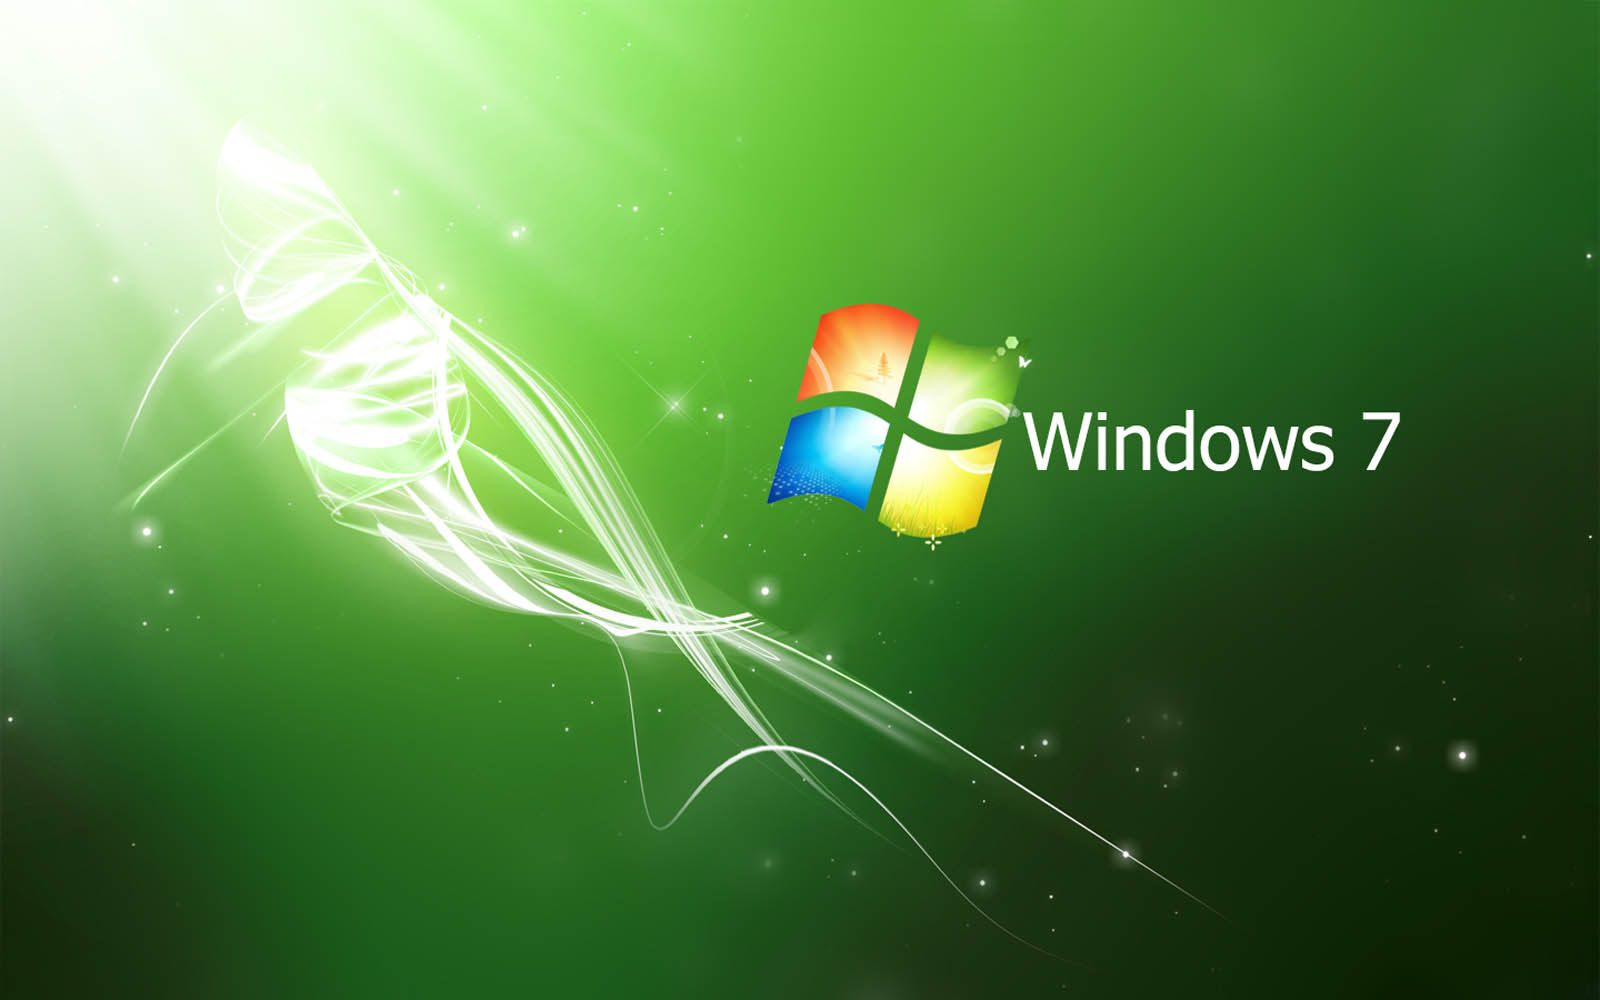  Windows 7 Wallpapers BackgroundsPhotos Images and Pictures for free